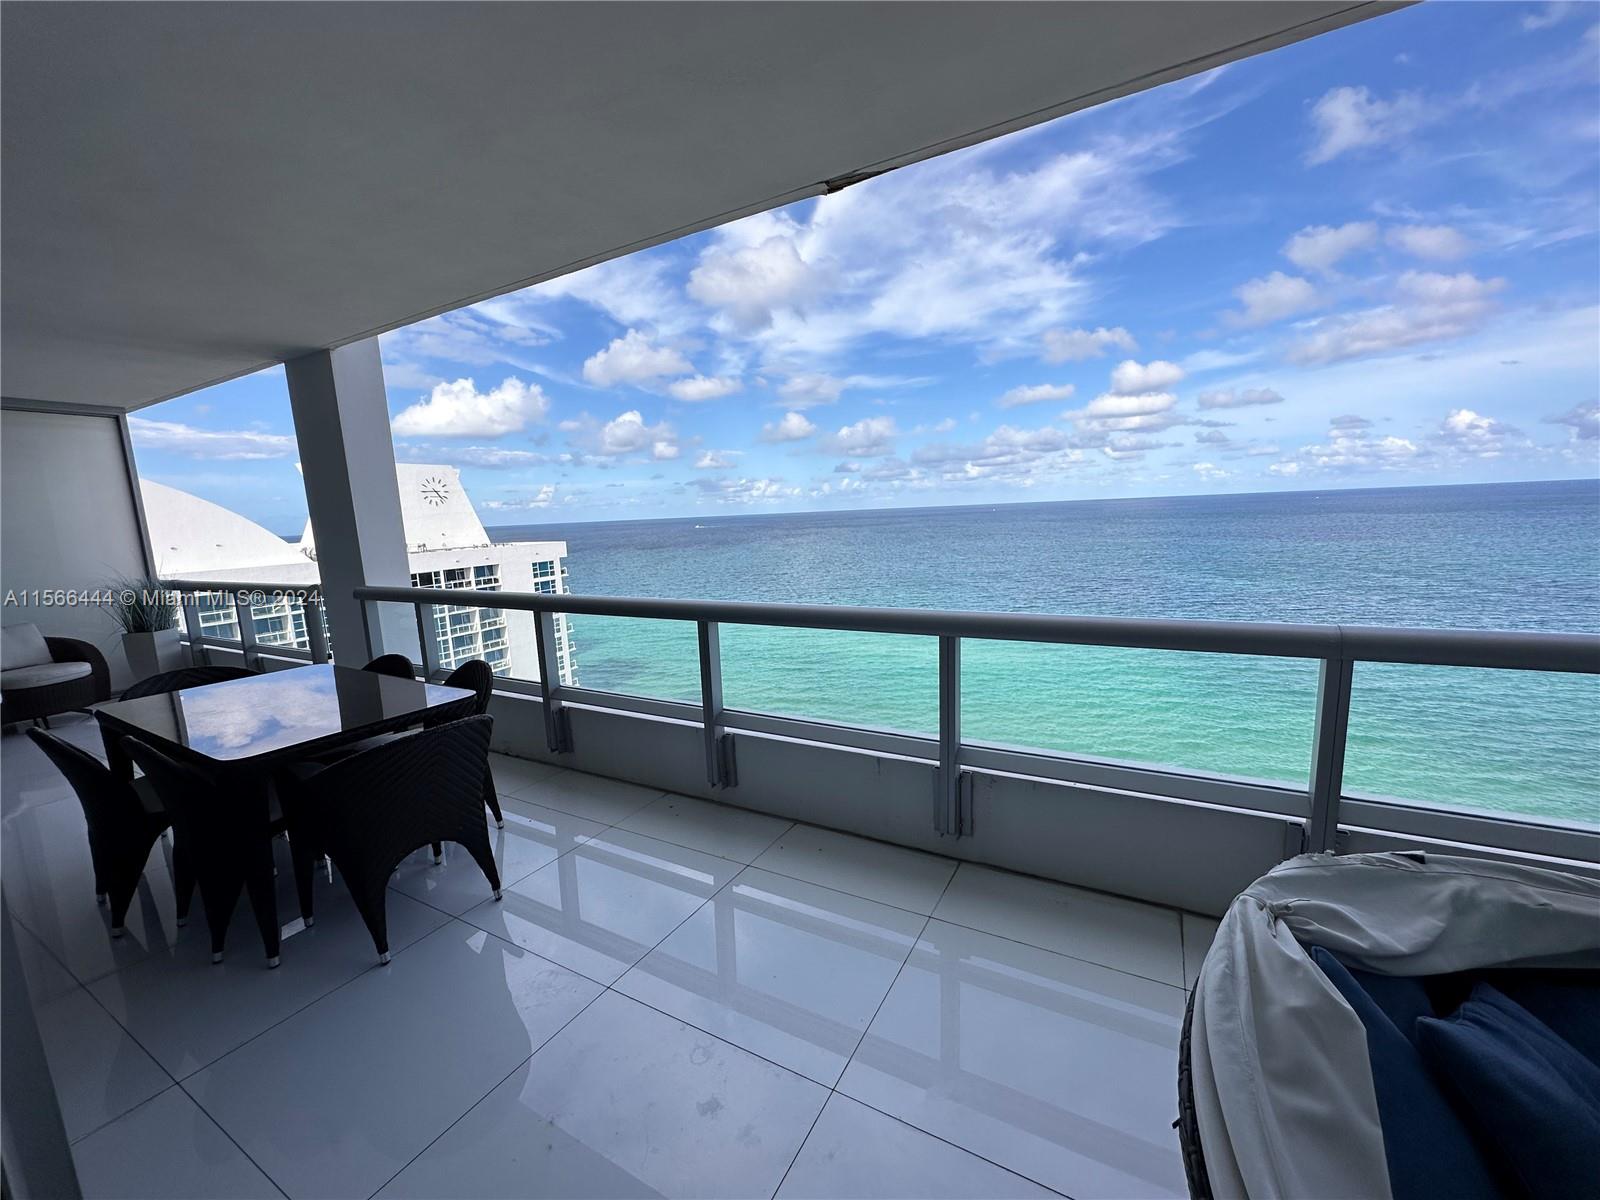 DIRECT OCEAN, HIGH FLOOR, XTRA LRGE TERRACE O4 LINE. WINTER SEASON RENTAL. Text for info. Immerse in luxury meets healthy living at Carillon Miami Wellness Resort. Conde Nast TOP Rated WELLNESS RESIDENCES.  2/2 furnished. More health amenities than imaginable. 100's classes/week, 70,000 sq. ft. fitness/spa center, hydrotherapy, sauna, steam, energy & regenerative medicine on site, salon, PT, Fitness & dedicated wellness staff, 4 pools, 2 Pilates Studios, rock-climbing, concierge, restaurant, juice bar, private beach w/food & towel service, 24-hr security, valet, boardwalk, bikes, dedicated wellness staff. This vibrant walking neighborhood provides easy access to convenient amenities such as Publix located across the street & casual int'l dining. North Beach is beachy, tranquil elegance.